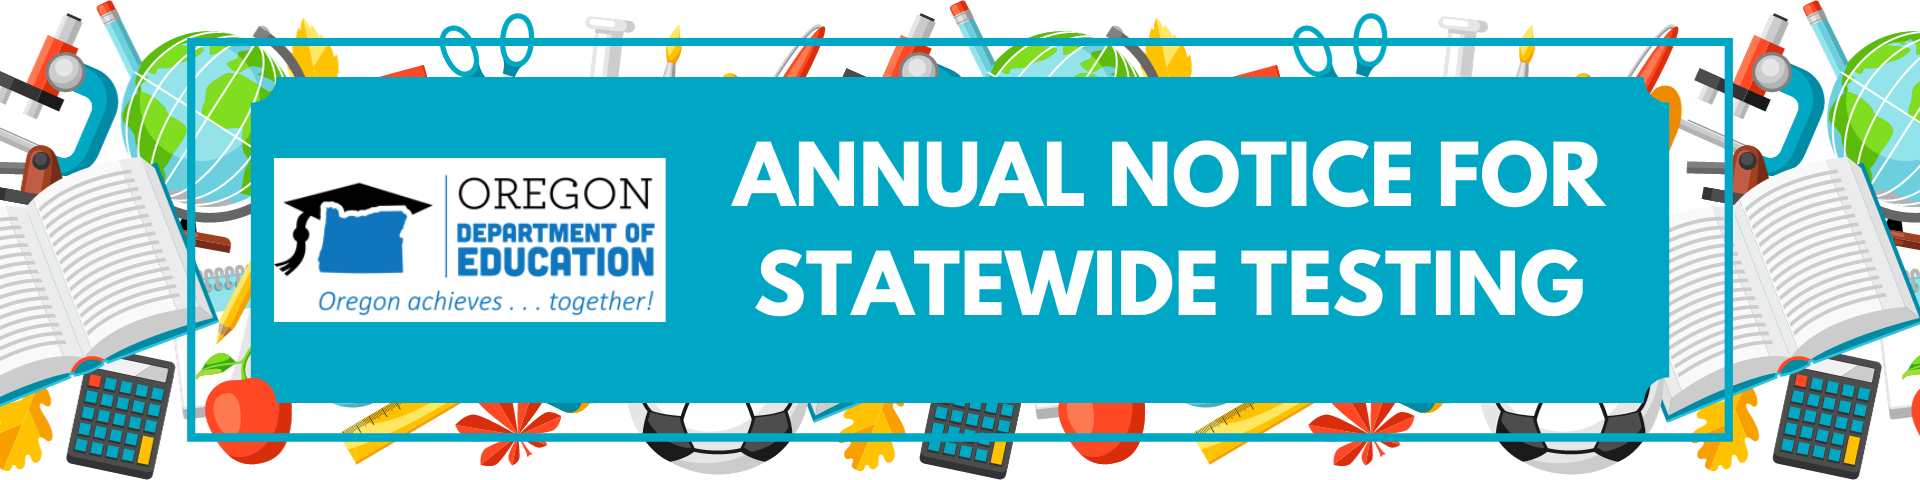 Annual Notice of Statewide Testing